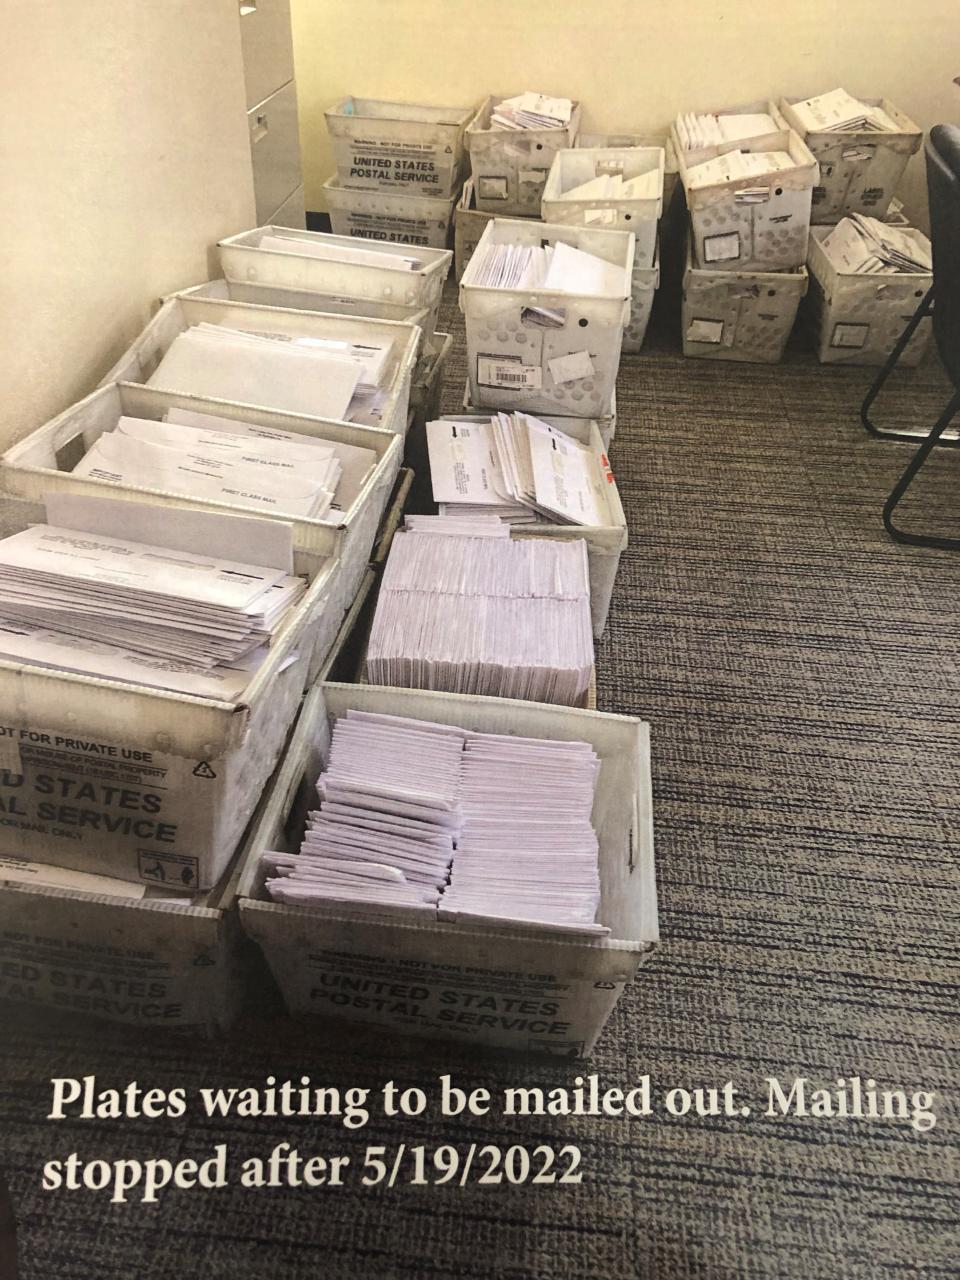 Photos handed out in Shelby County Commission Wednesday, June 1, show stacks of license plates ready to be mailed out in the Shelby County Clerk's Office.